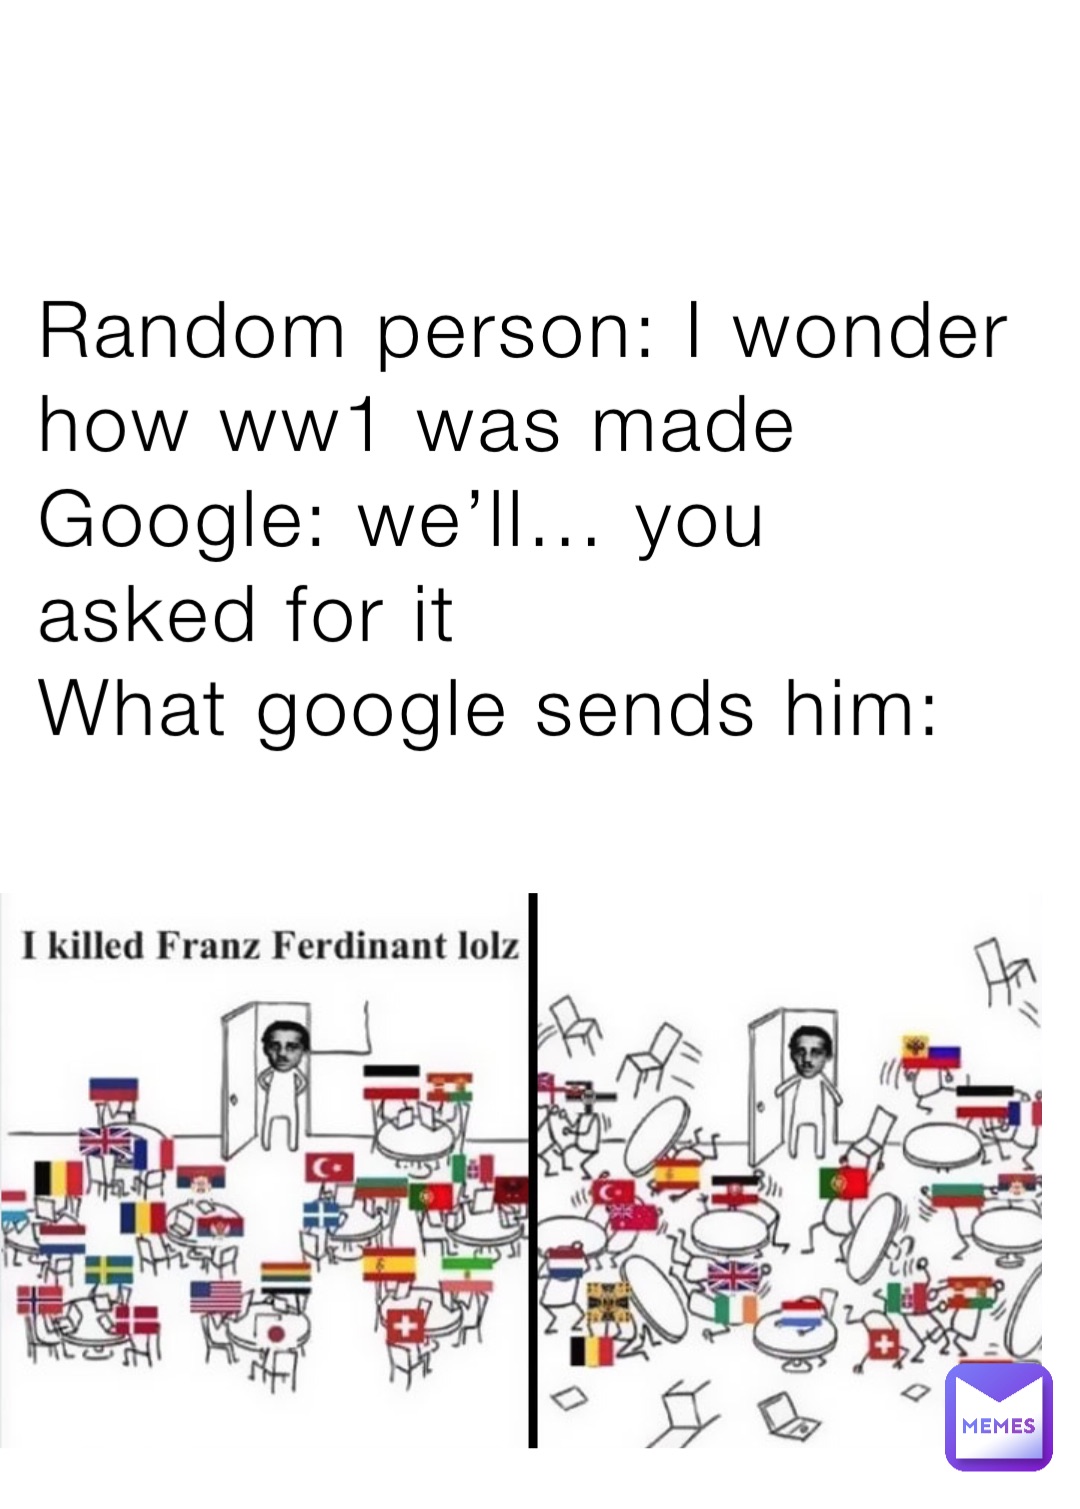 Random person: I wonder how ww1 was made
Google: we’ll… you asked for it
What google sends him: